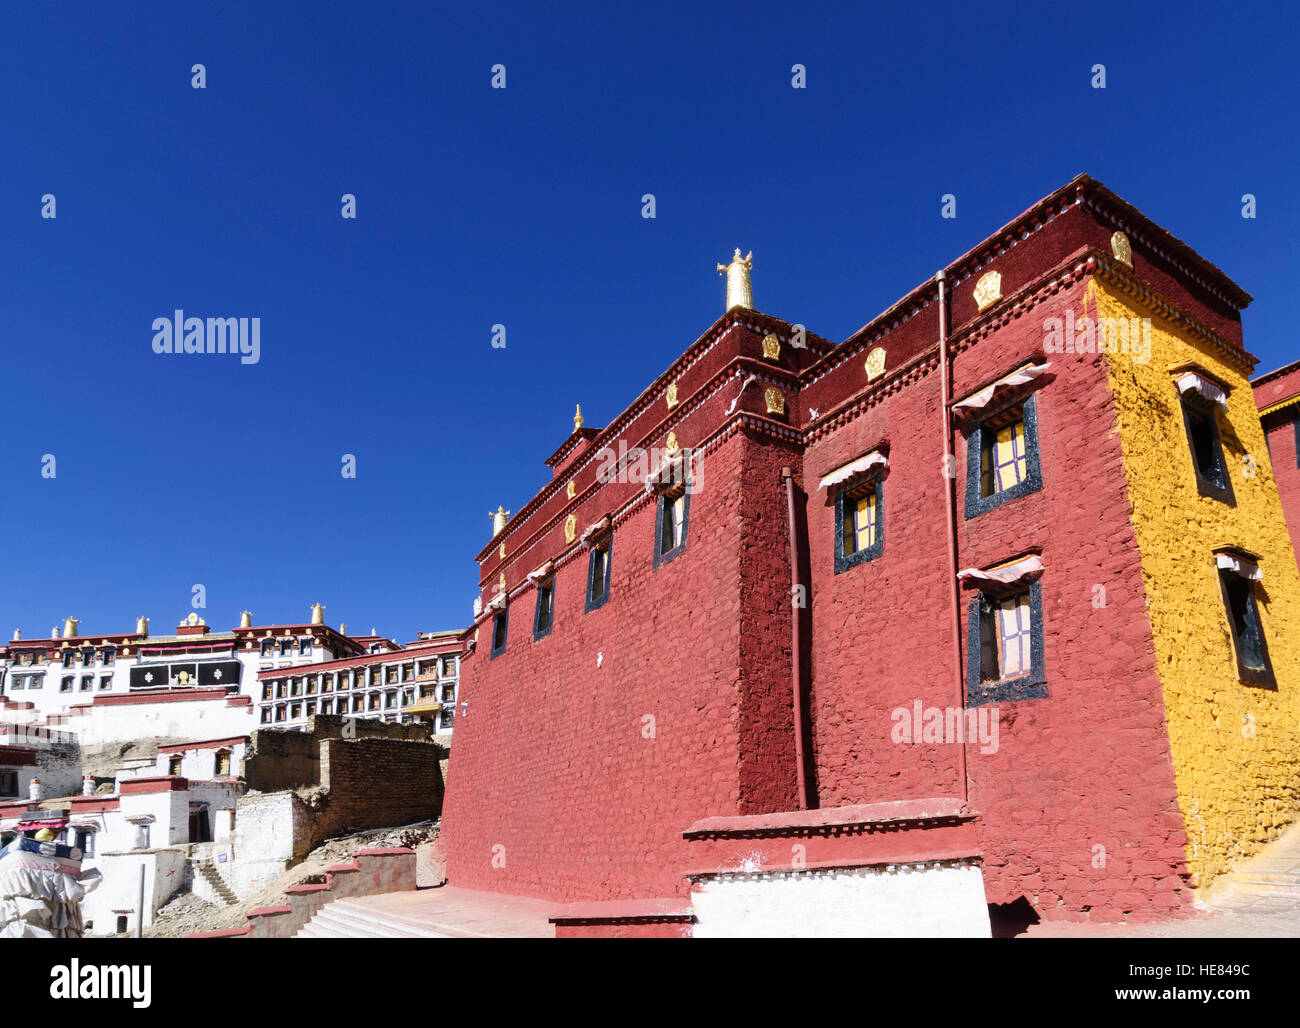 Ganden: Monastery of Ganden: Headquarters of the Gelugpa (Yellow Cap) Order, which also includes the Dalai Lama and the Panchen Lama; Tomb of Tsongkha Stock Photo